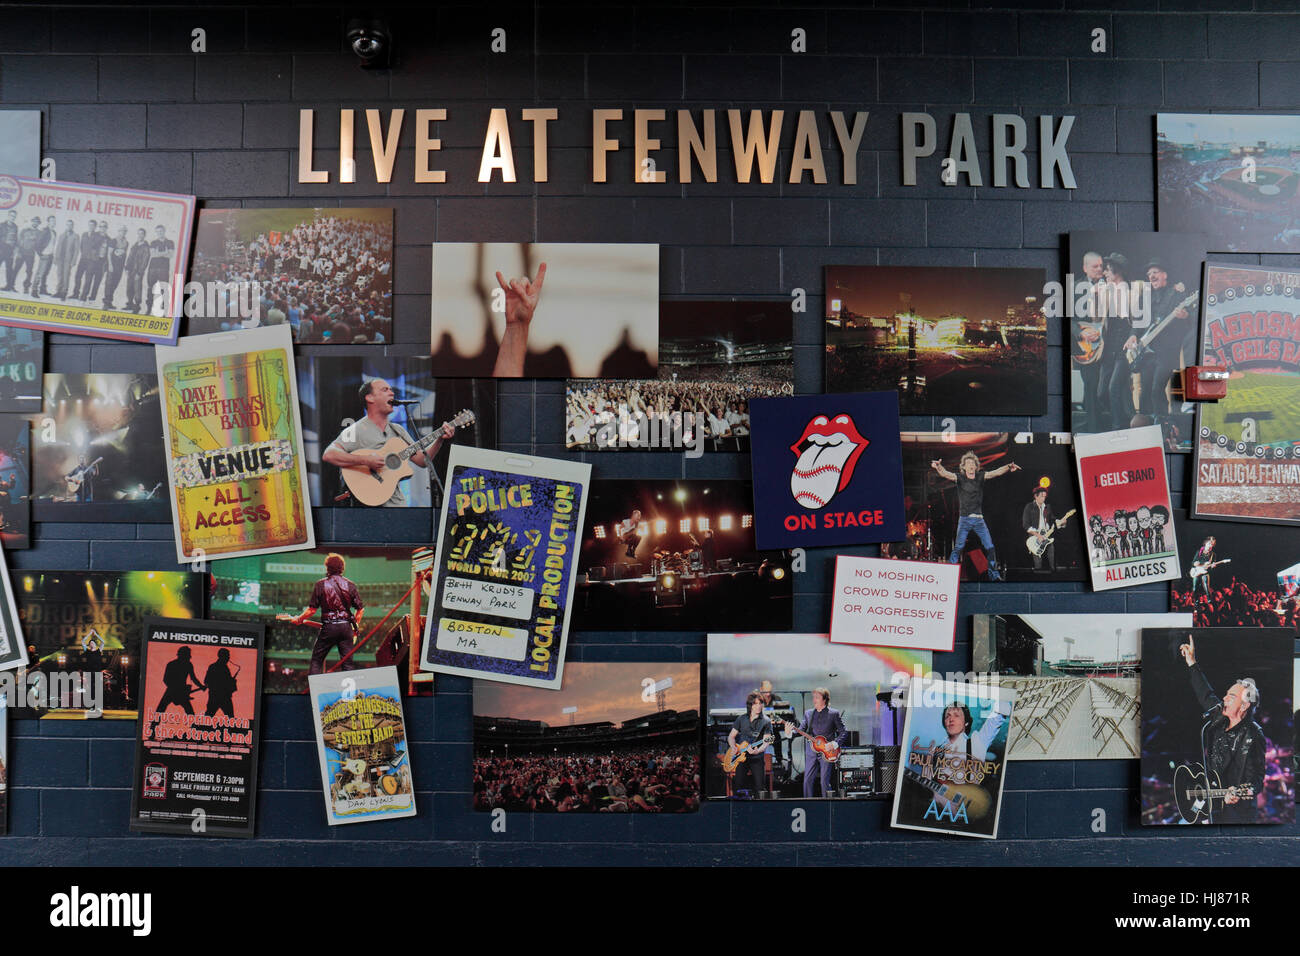 The Live At Fenway Park memorial wall Fenway Park, home of the Boston Red Sox, Boston, MA, United States. Stock Photo